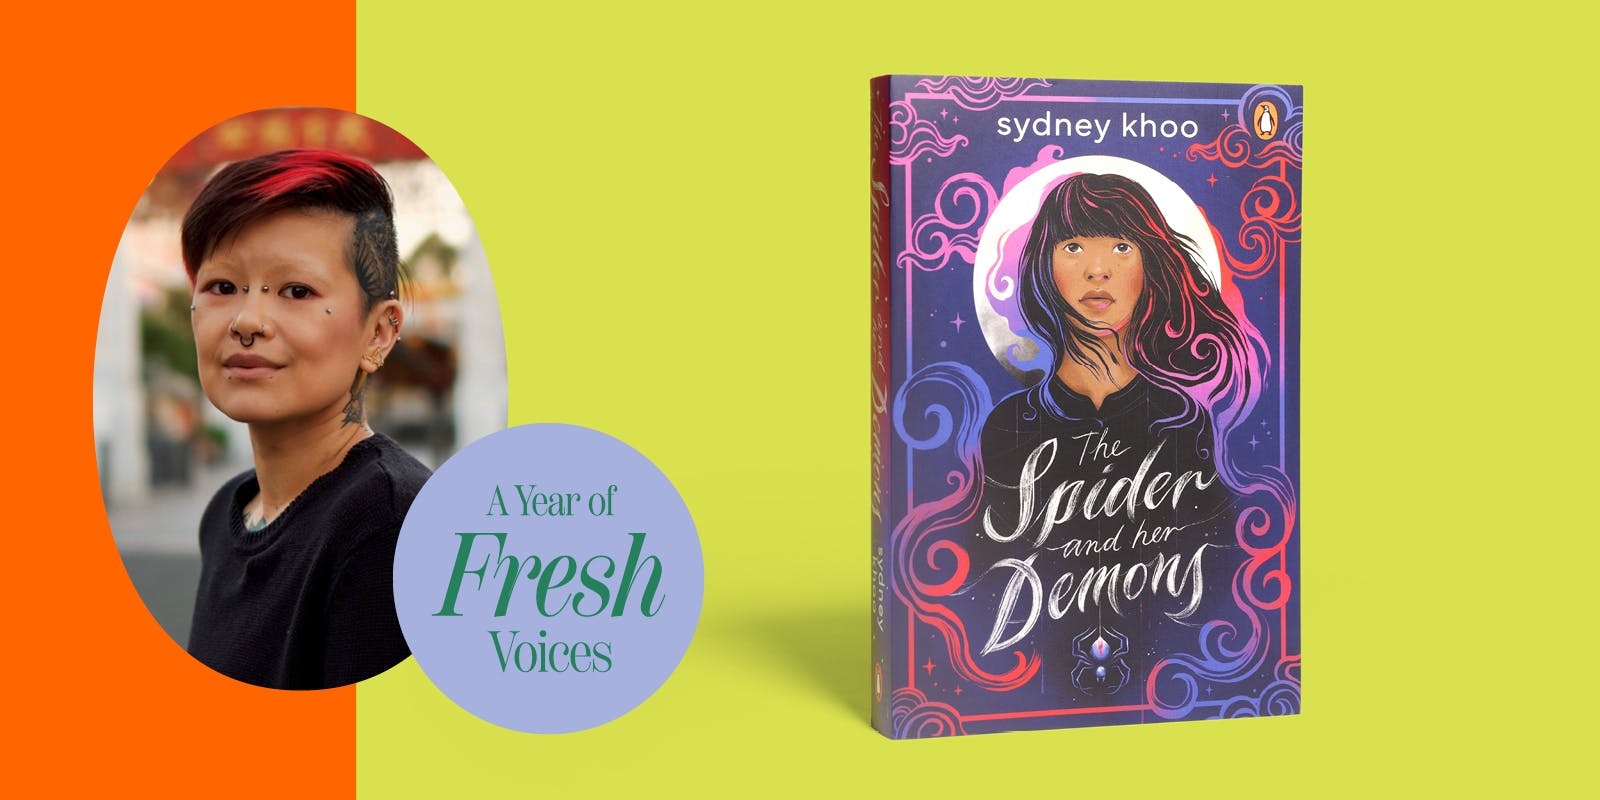 How fanfic inspired sydney khoo to become an author